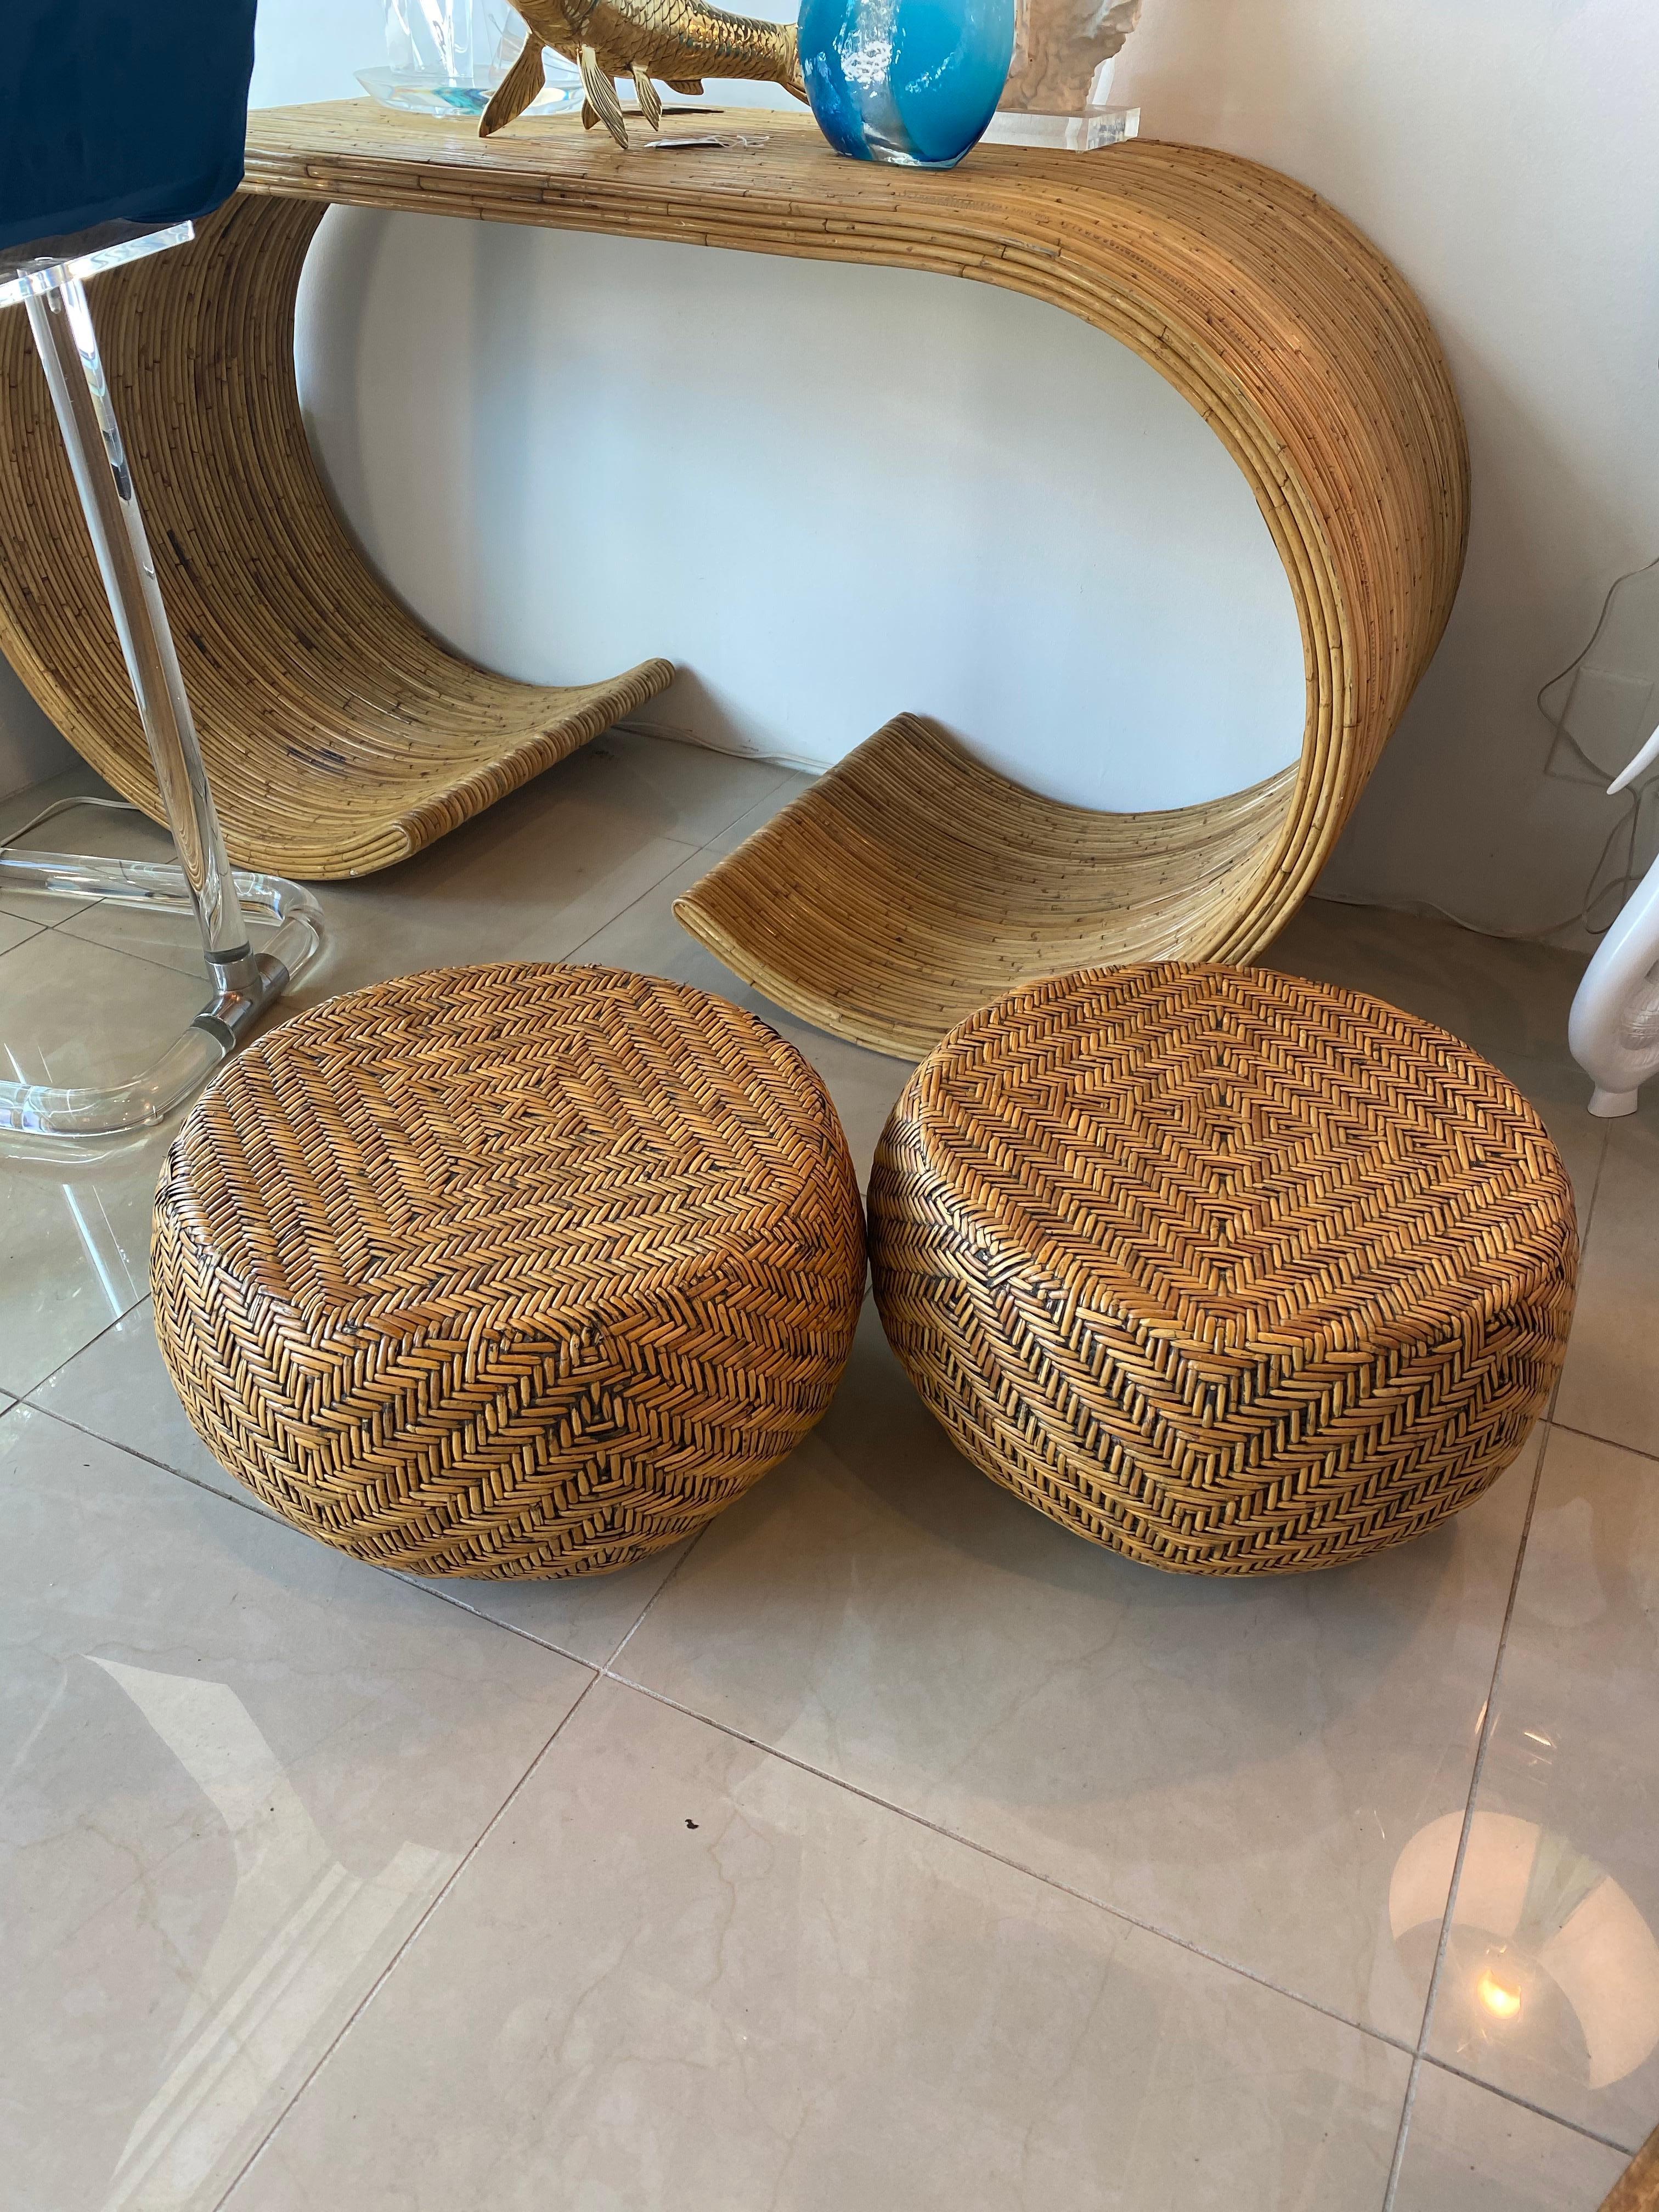 Hollywood Regency Vintage Pair of Woven Wicker Round Footstools Stools Benches Ottomans